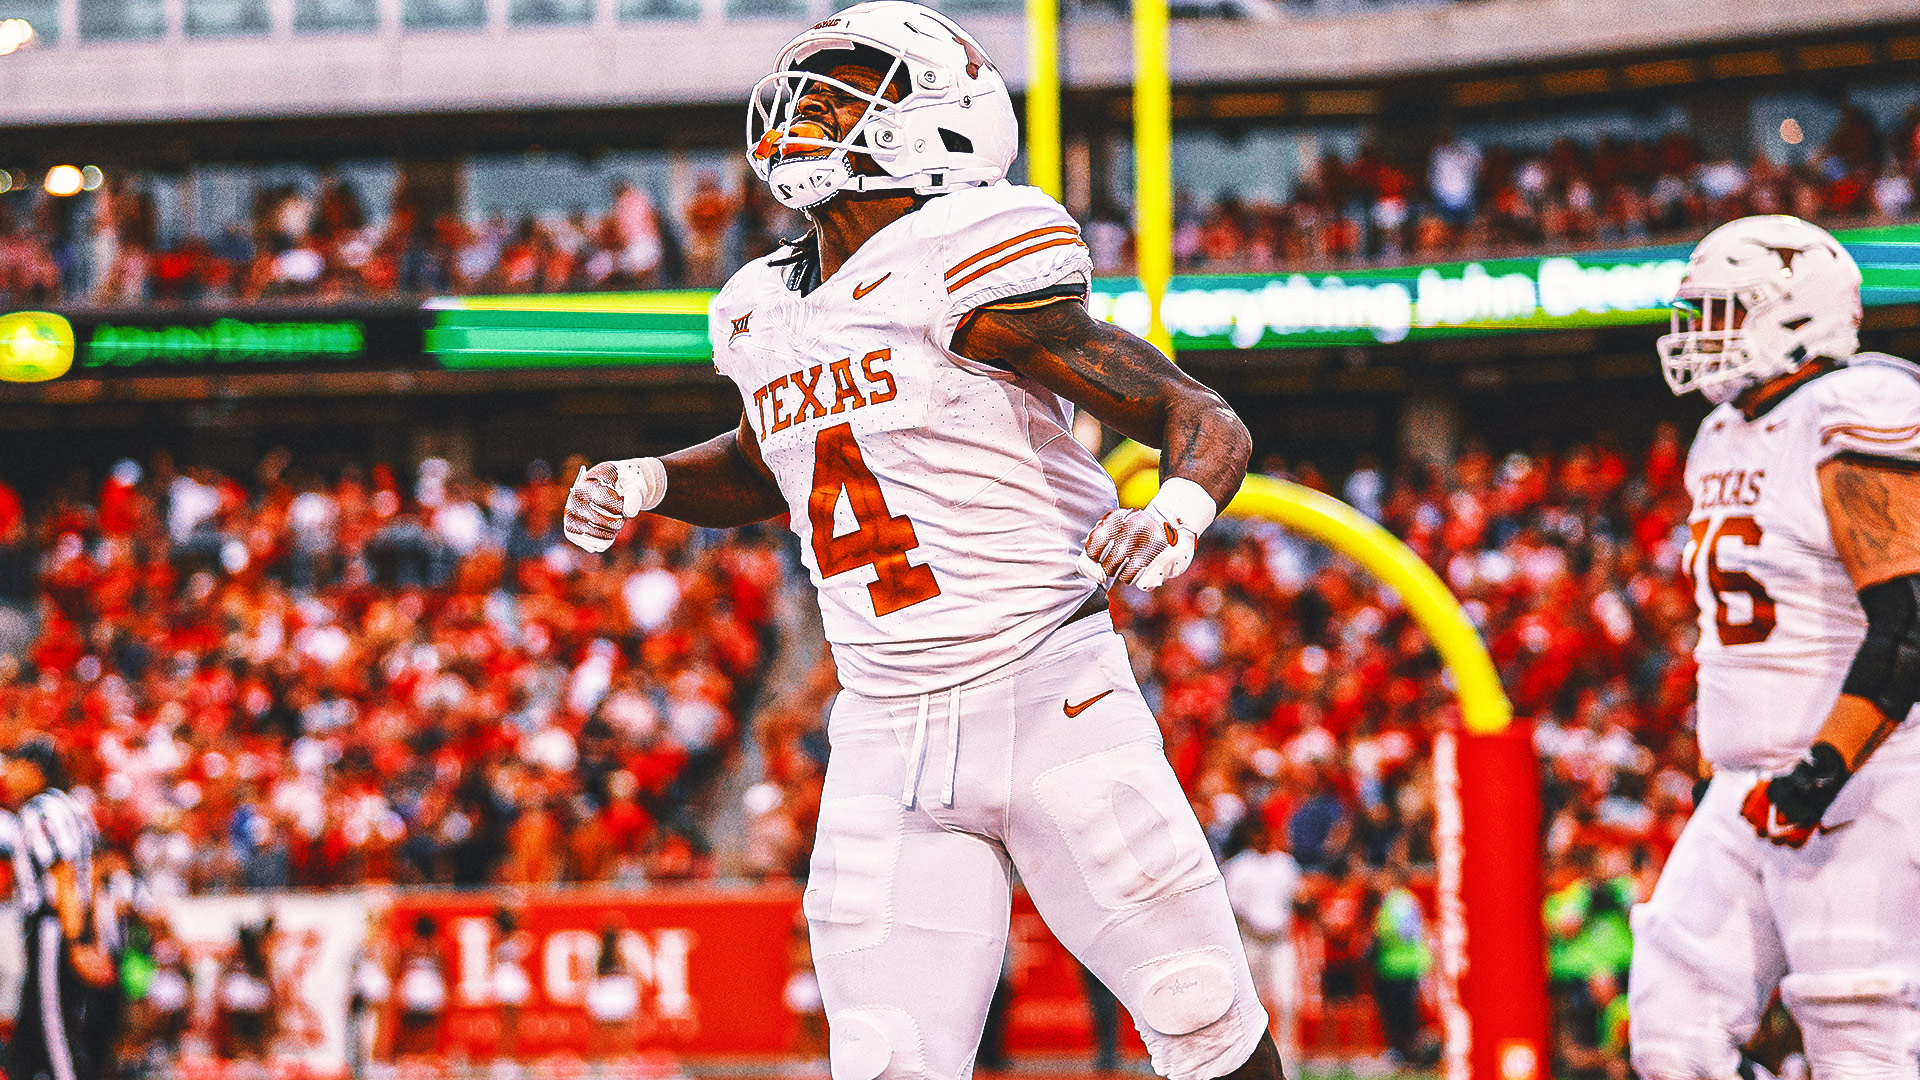 CJ Baxter scores late TD, Texas derails Houston's late drive for 31-24 win